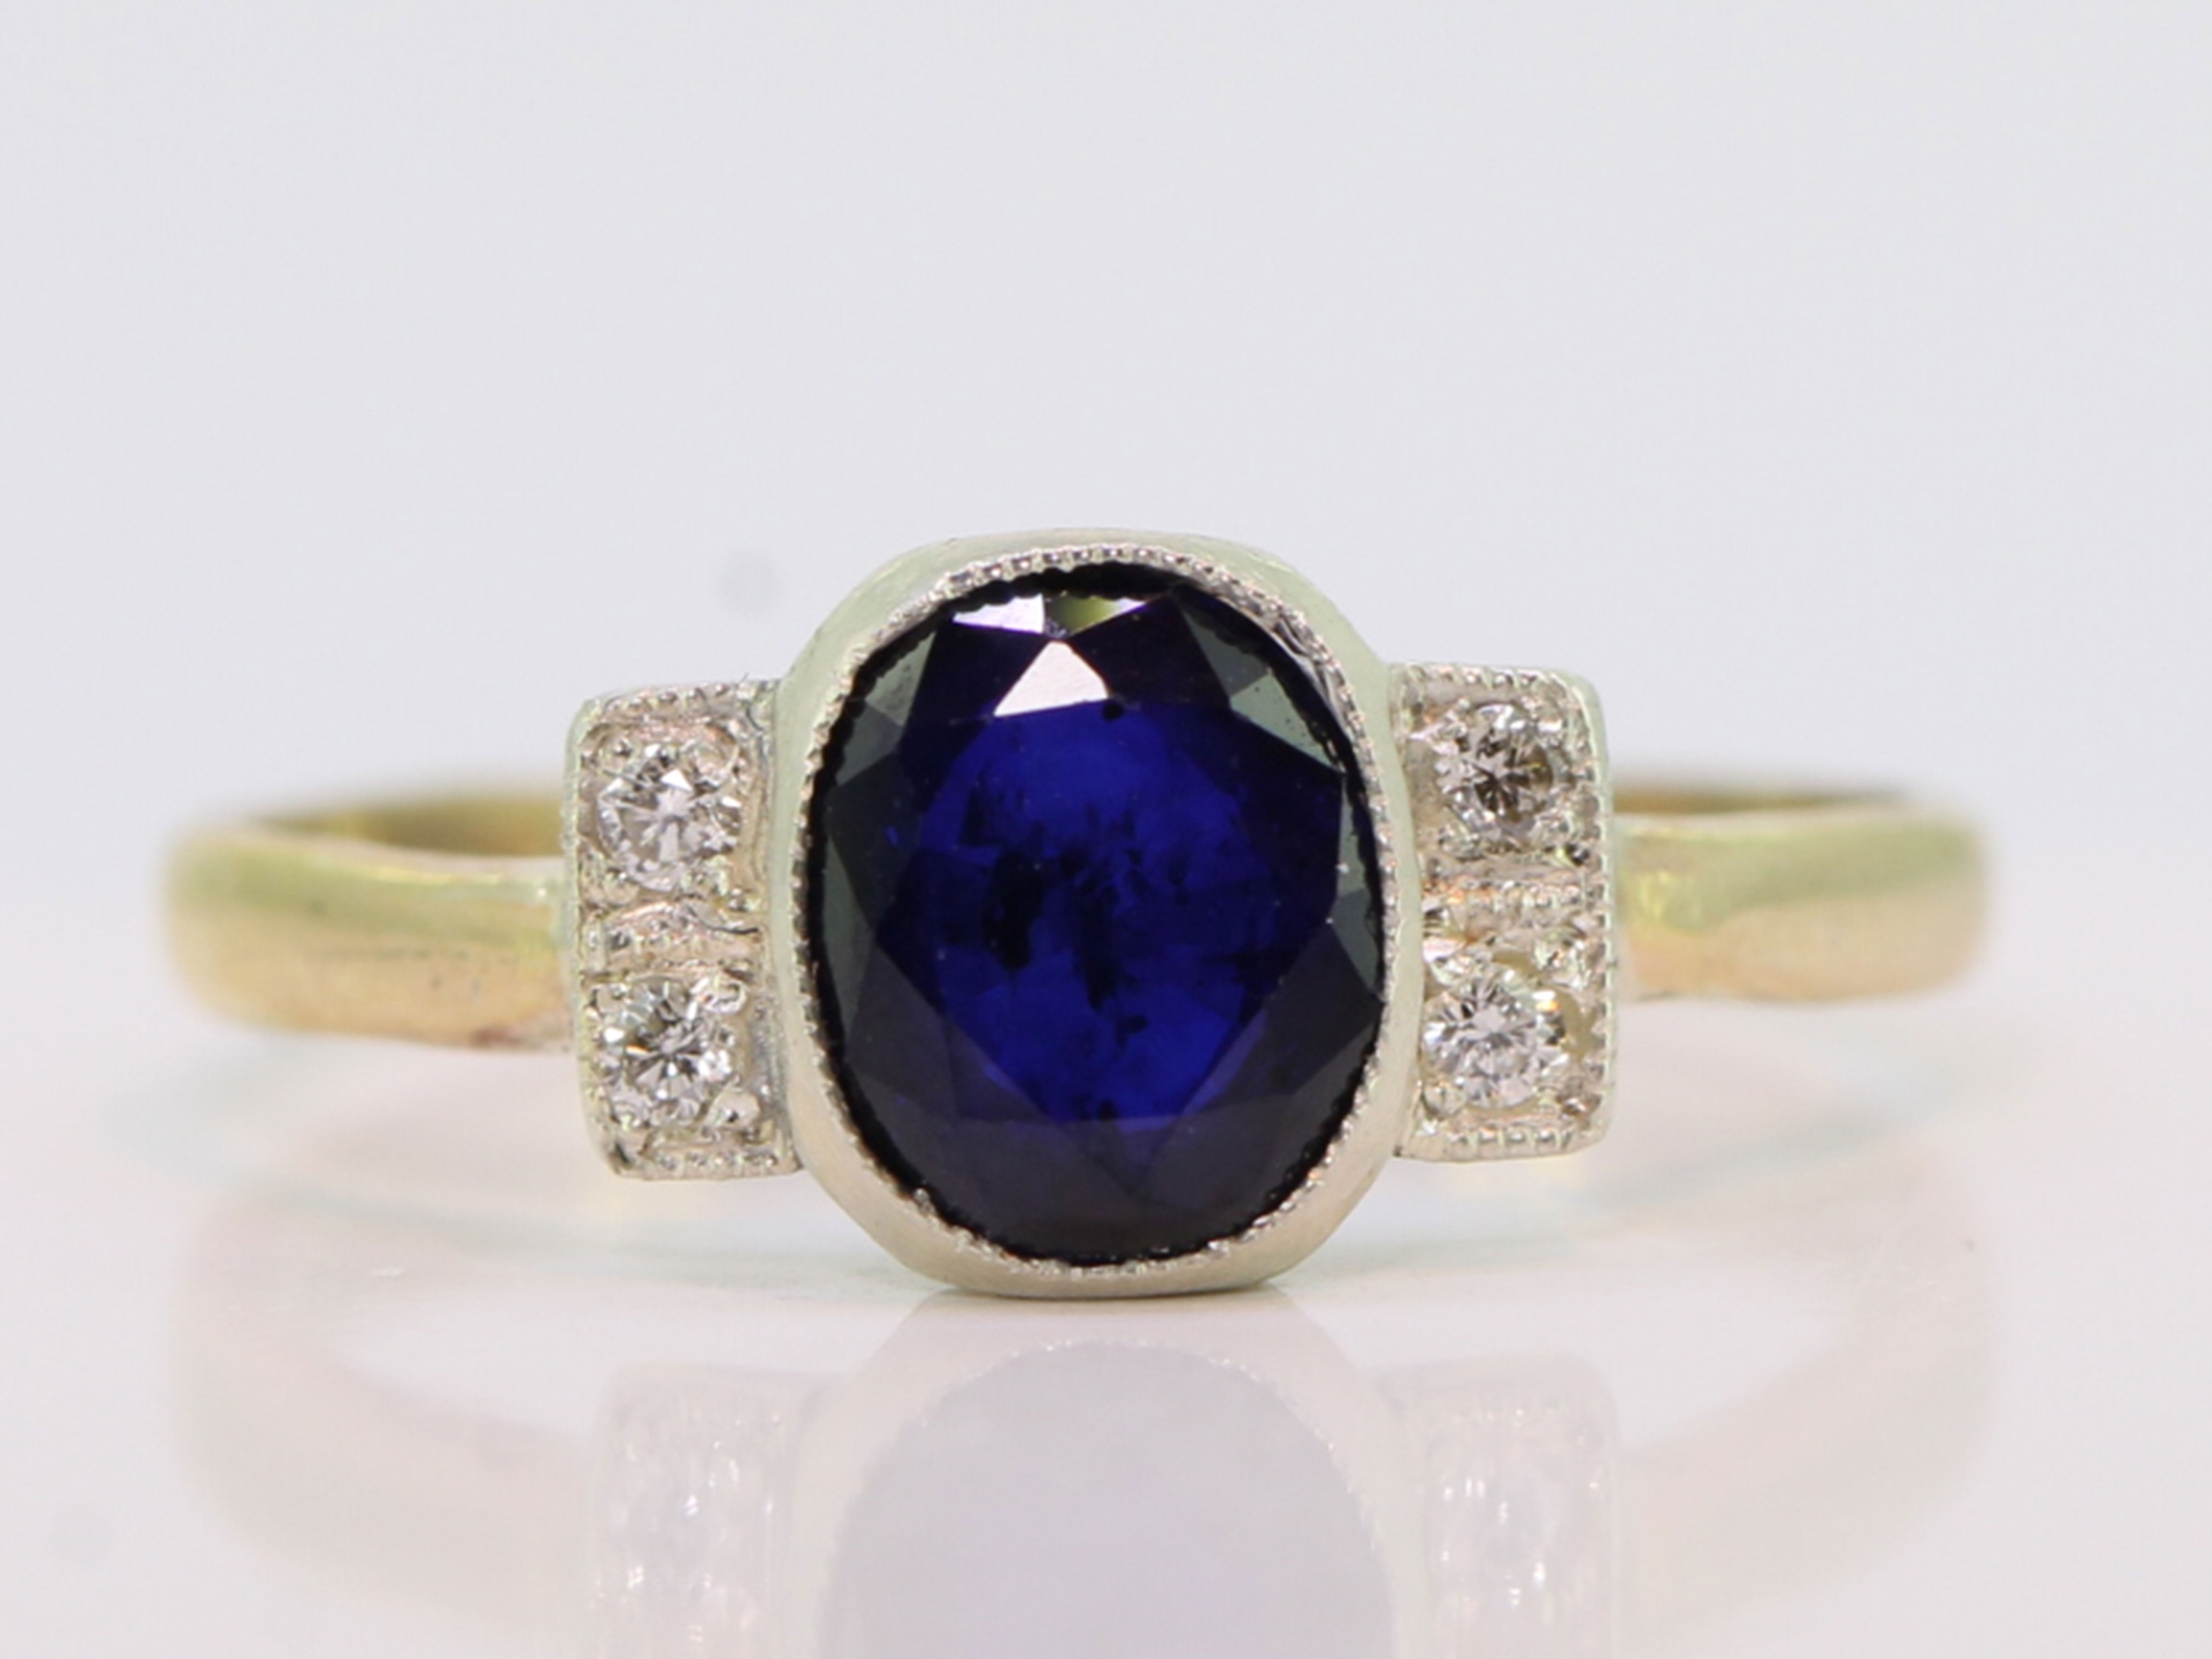 Sapphire and diamond art deco inspired silver and 9 carat gold ring